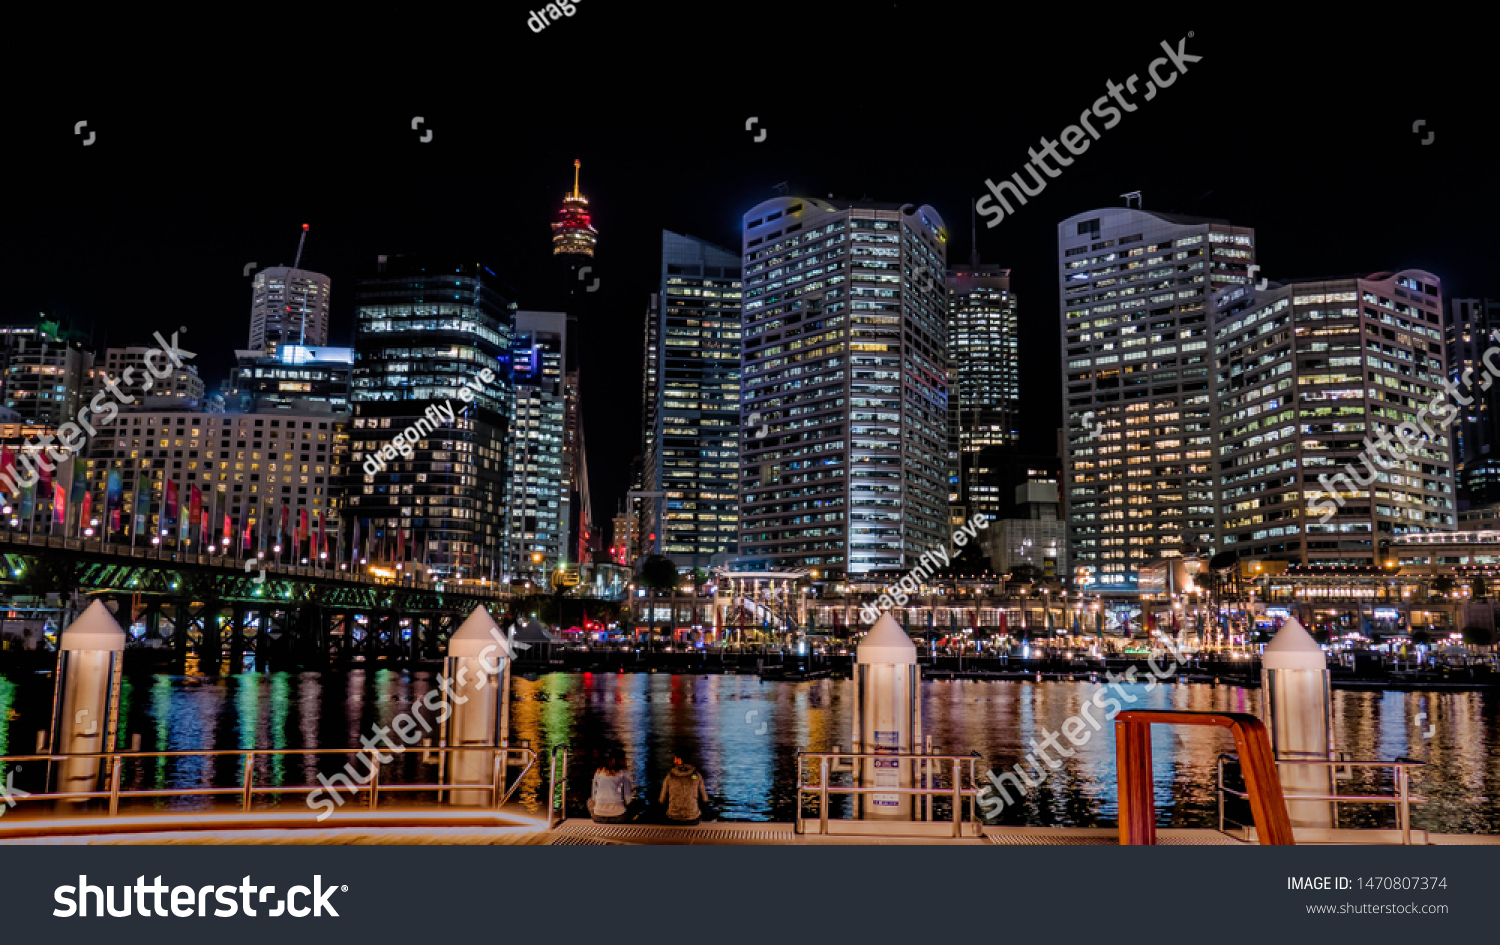 A night at the Darling Harbour in Sydney #1470807374